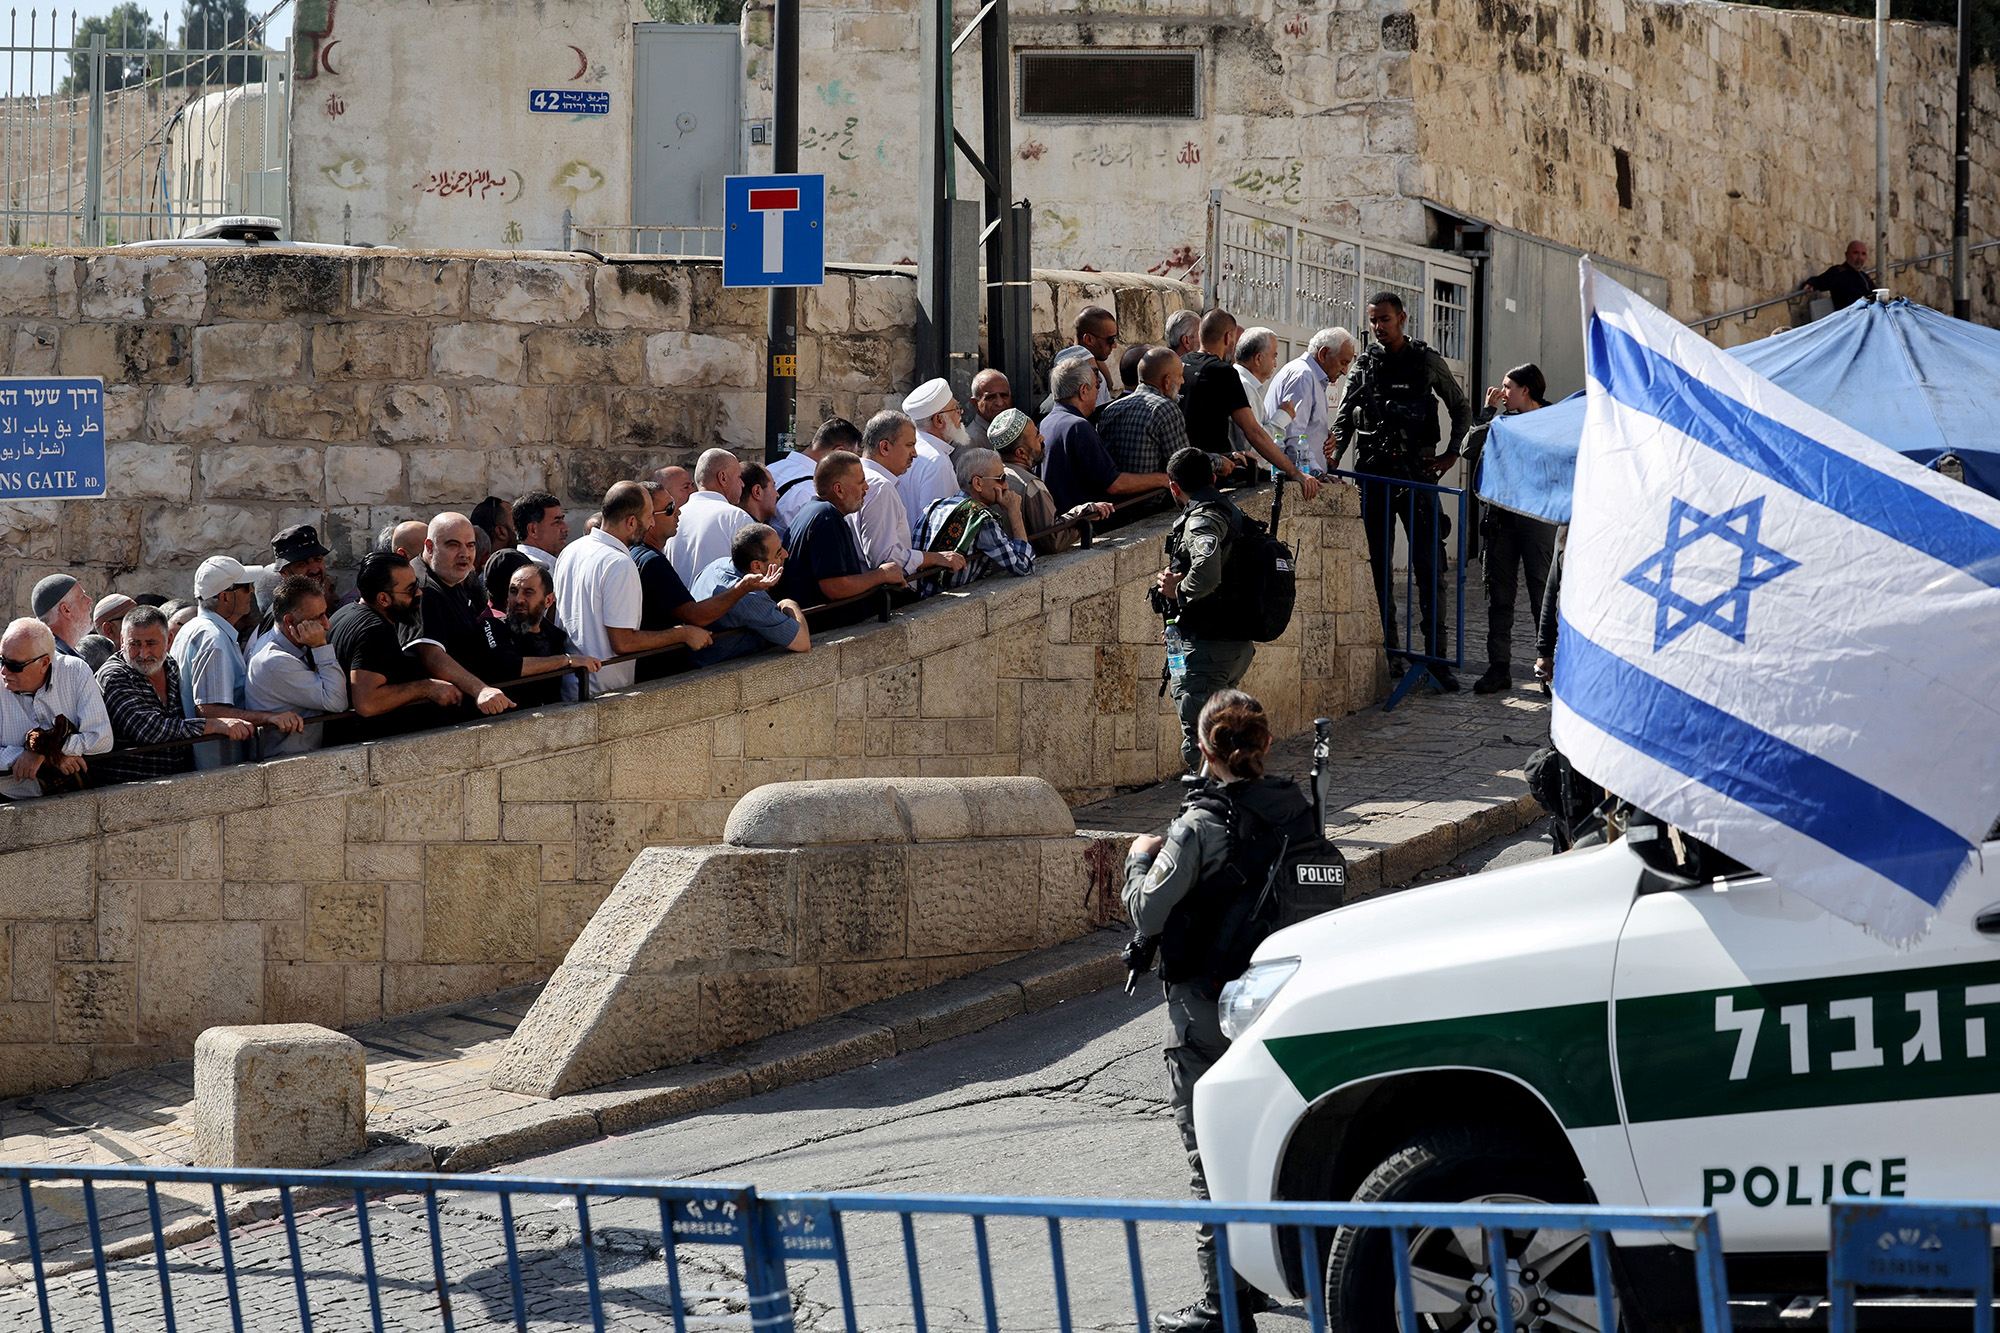 Israeli border police watch as Muslim worshippers arrive at the Lion's Gate to make their way to the al-Aqsa Mosque compound for the Friday noon prayer in East Jerusalem on November 3.